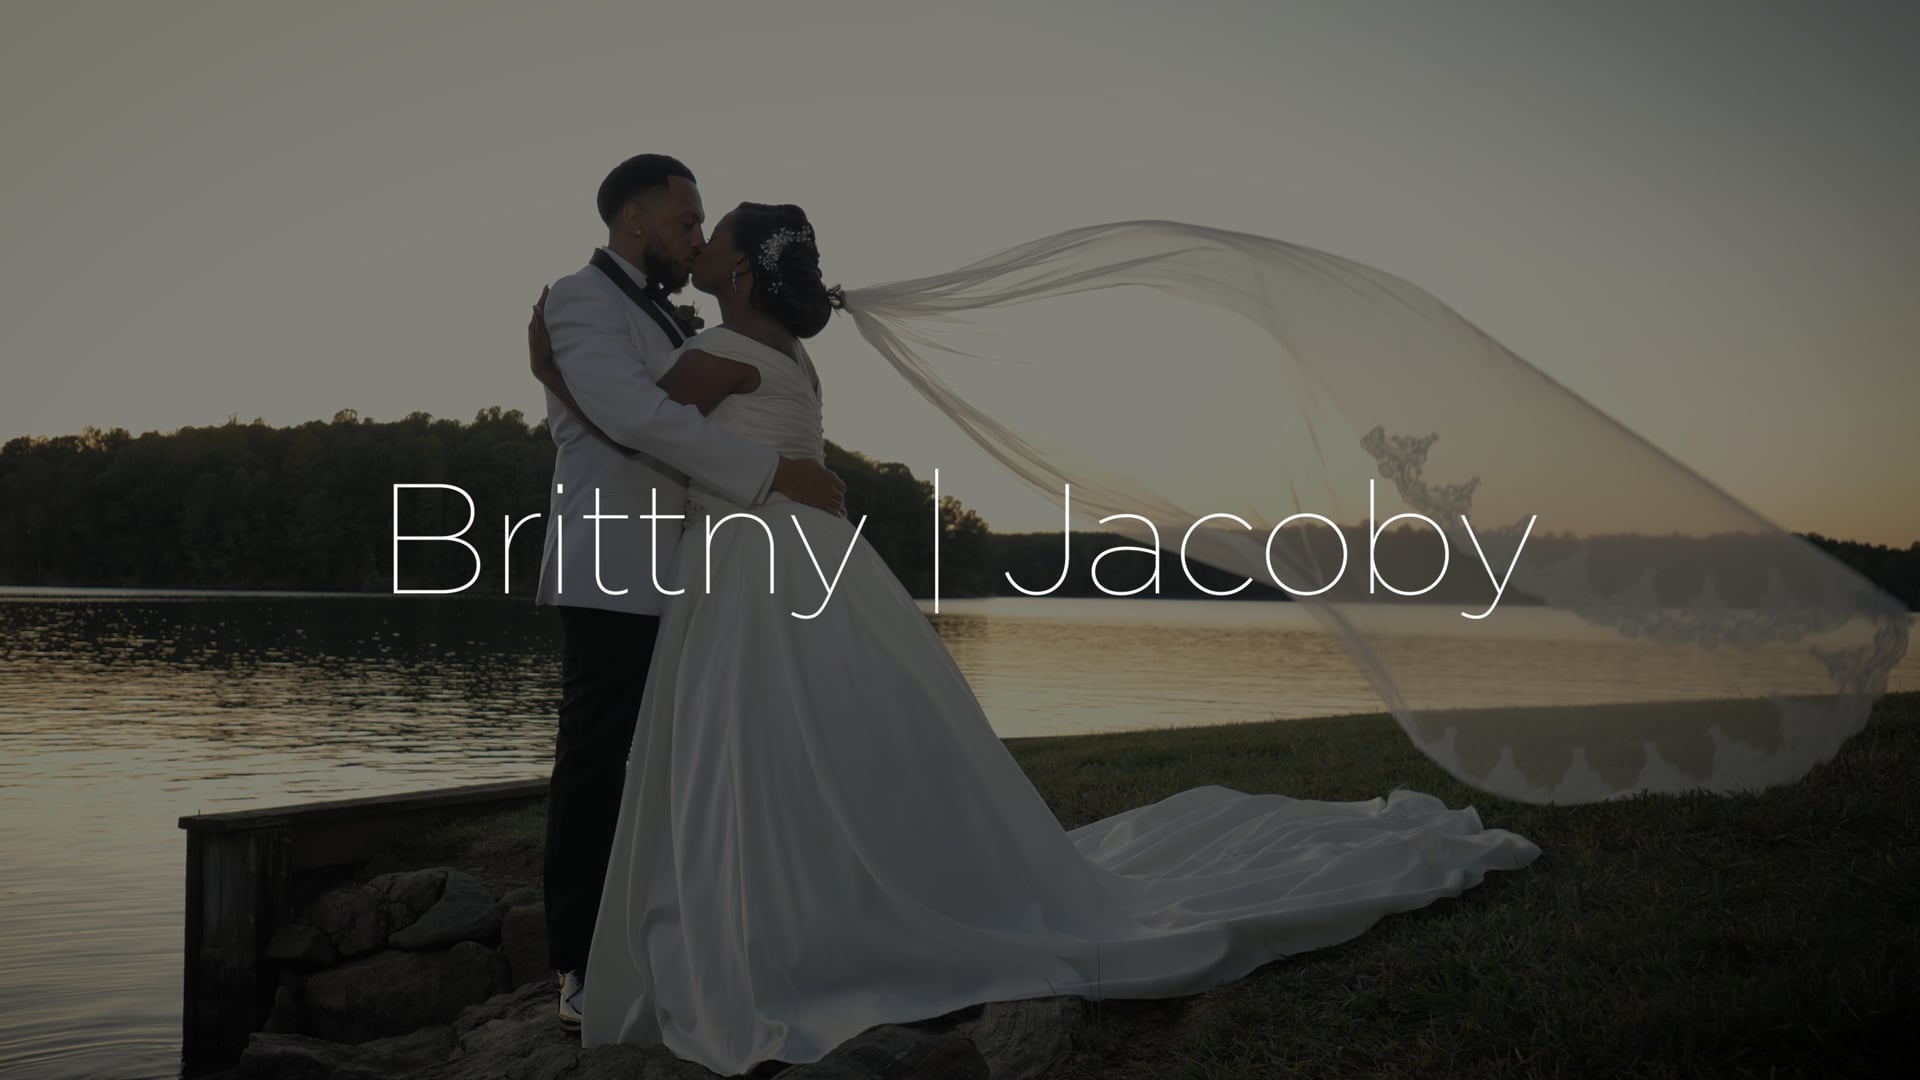 Brittny and Jacoby's Teaser